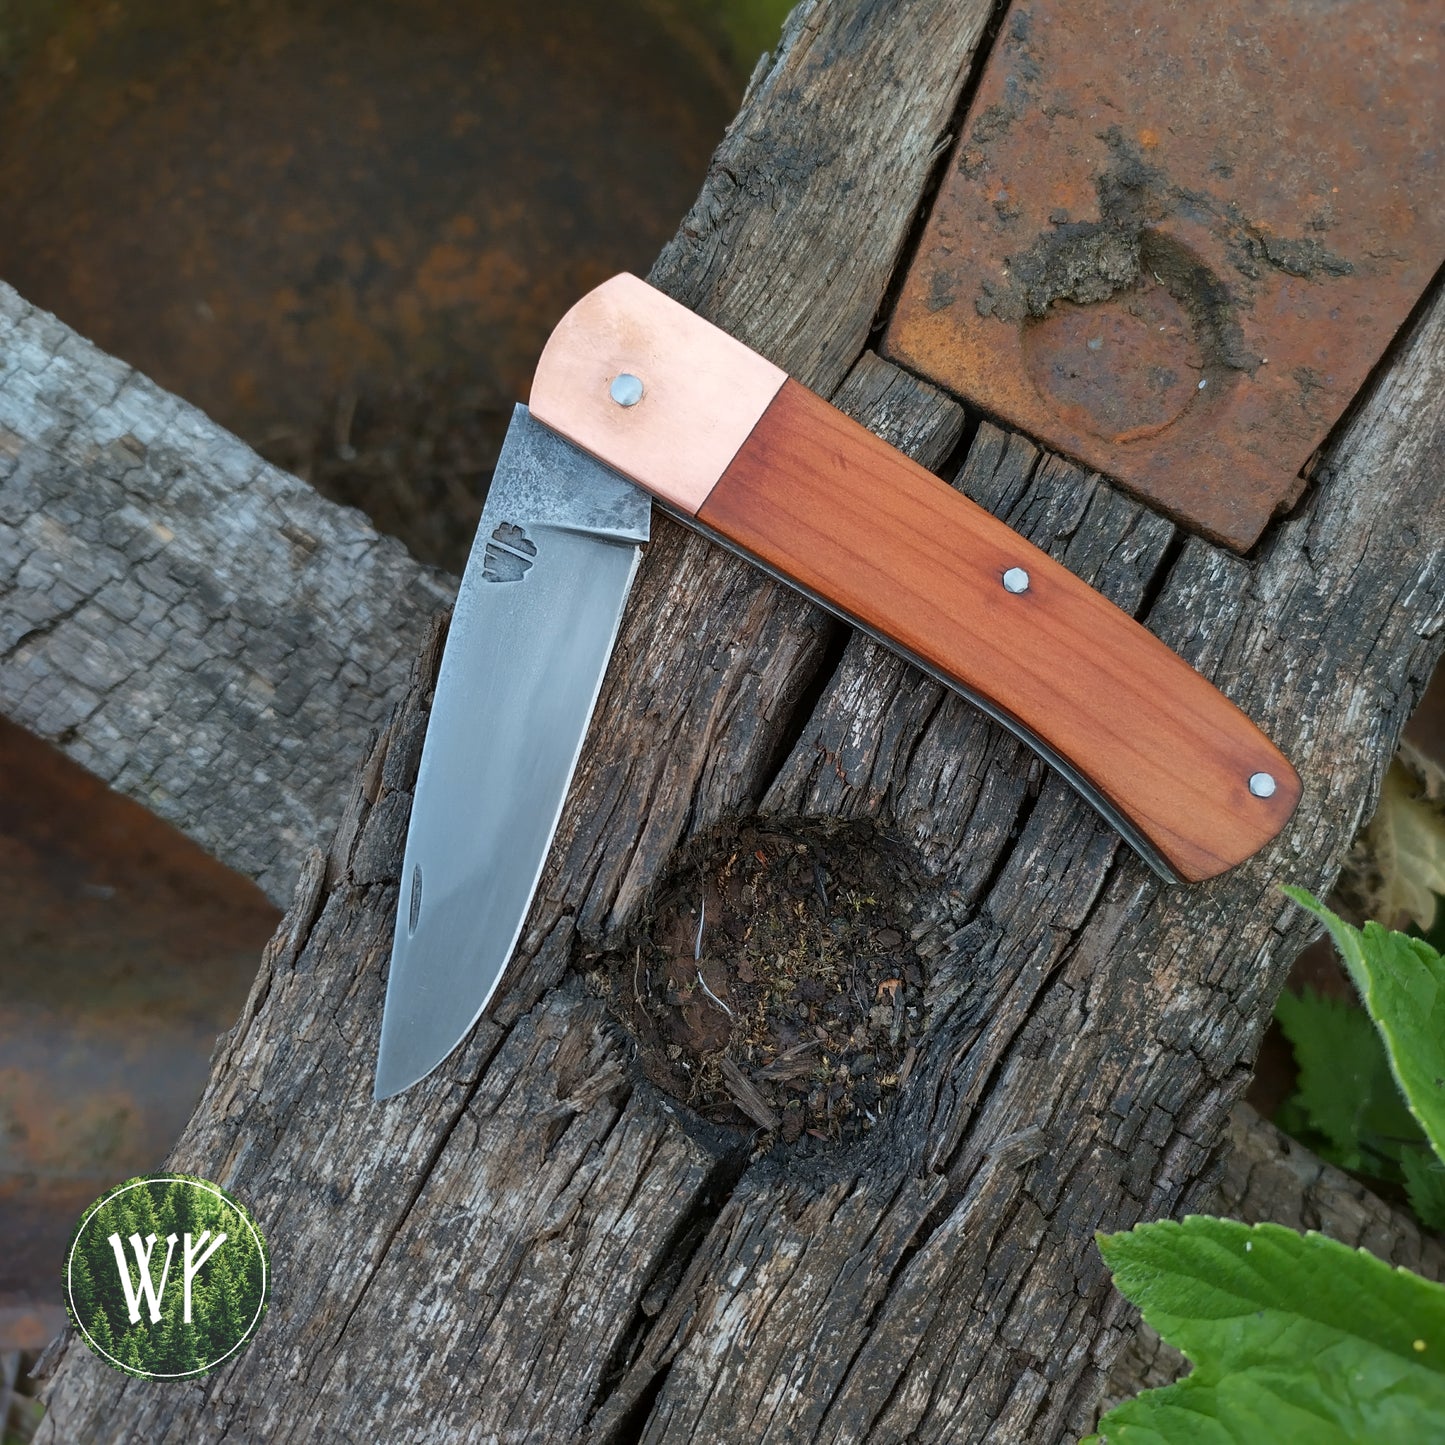 RESERVED FOR LUCKY Hand-forged Slipjoint / UK Legal Folding Knife / 26c3 Blade with Copper & YewHandle